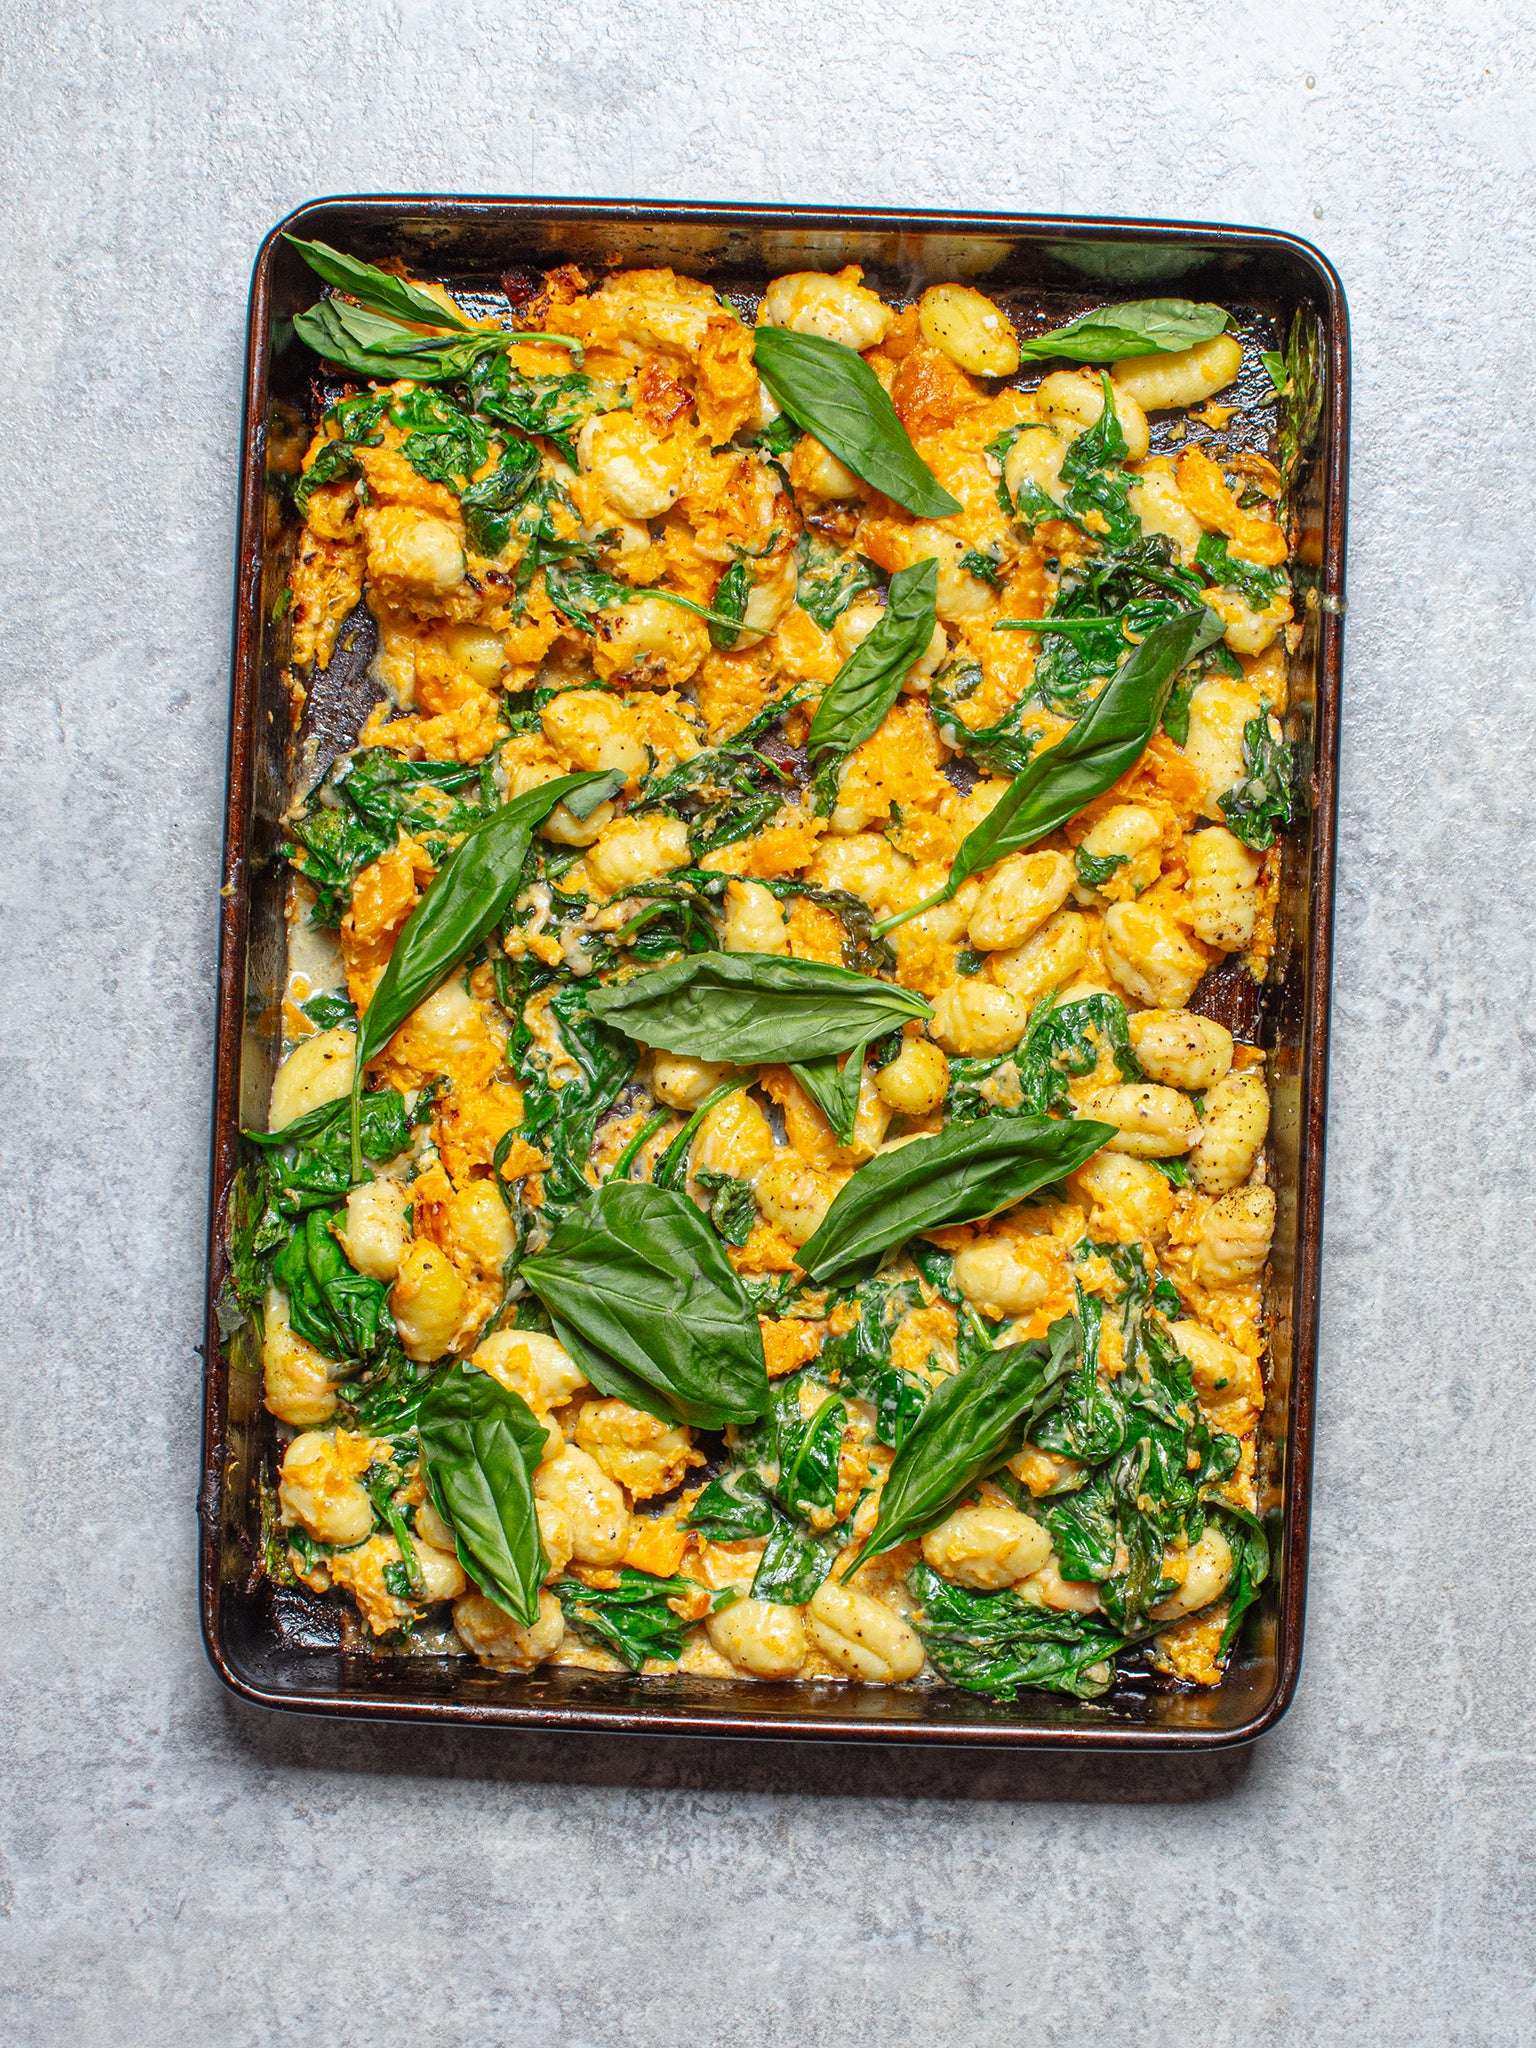 Impress you guests with this gnocchi dish